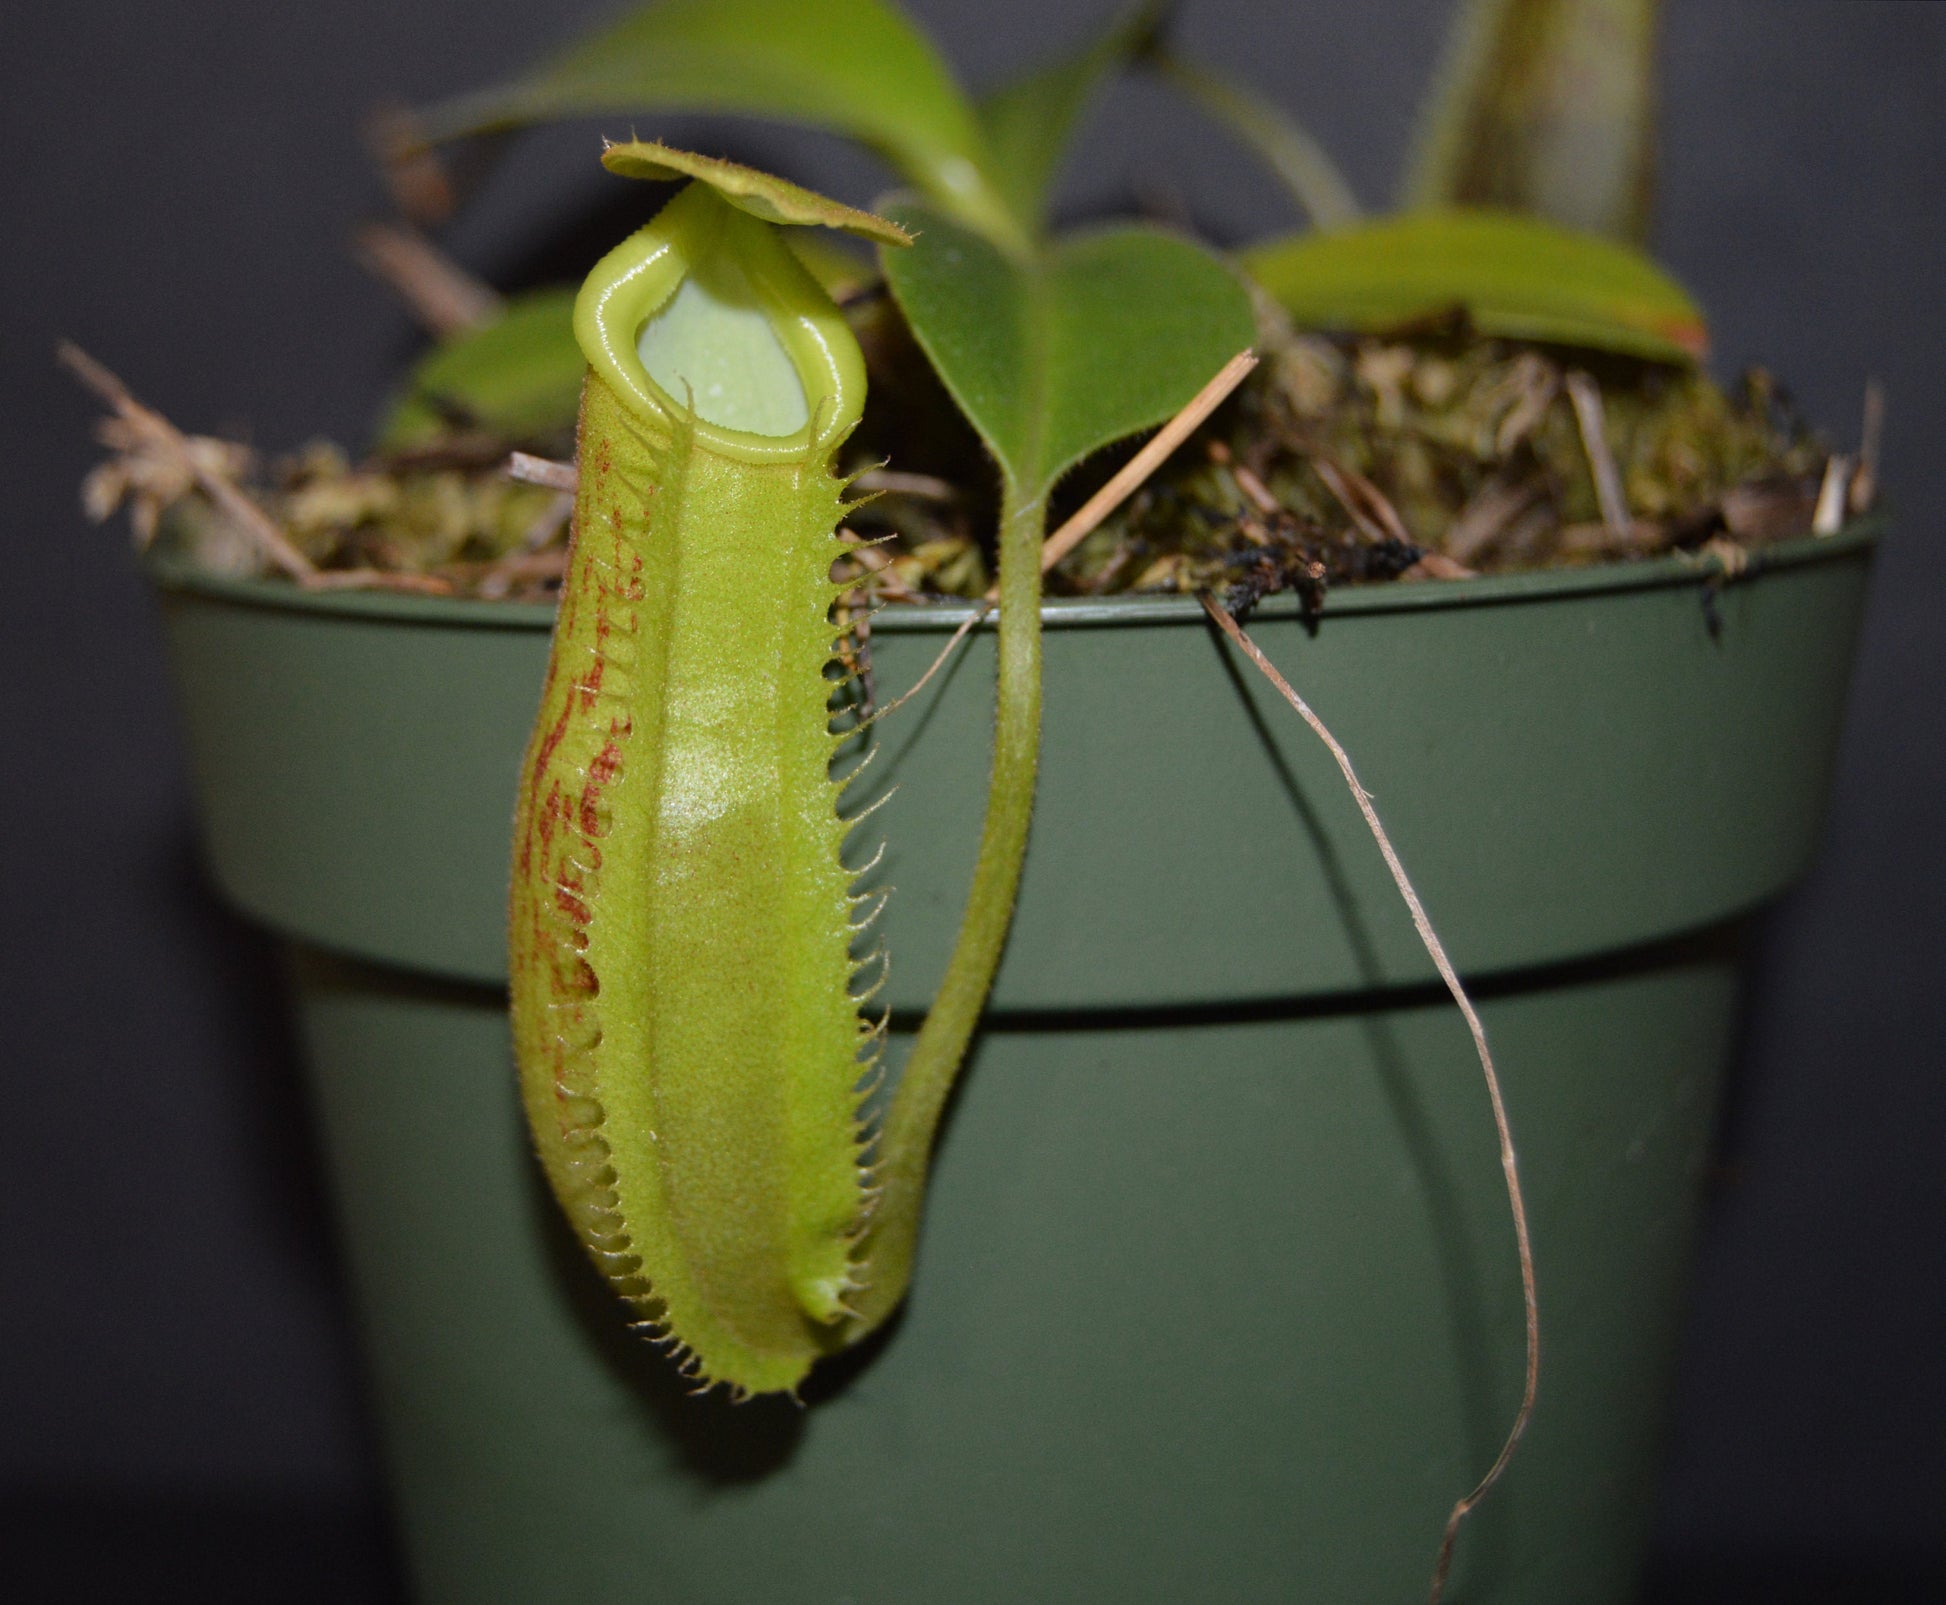 exciting hybrid with maroon and green large speckled pitcher body and flared striped peristome